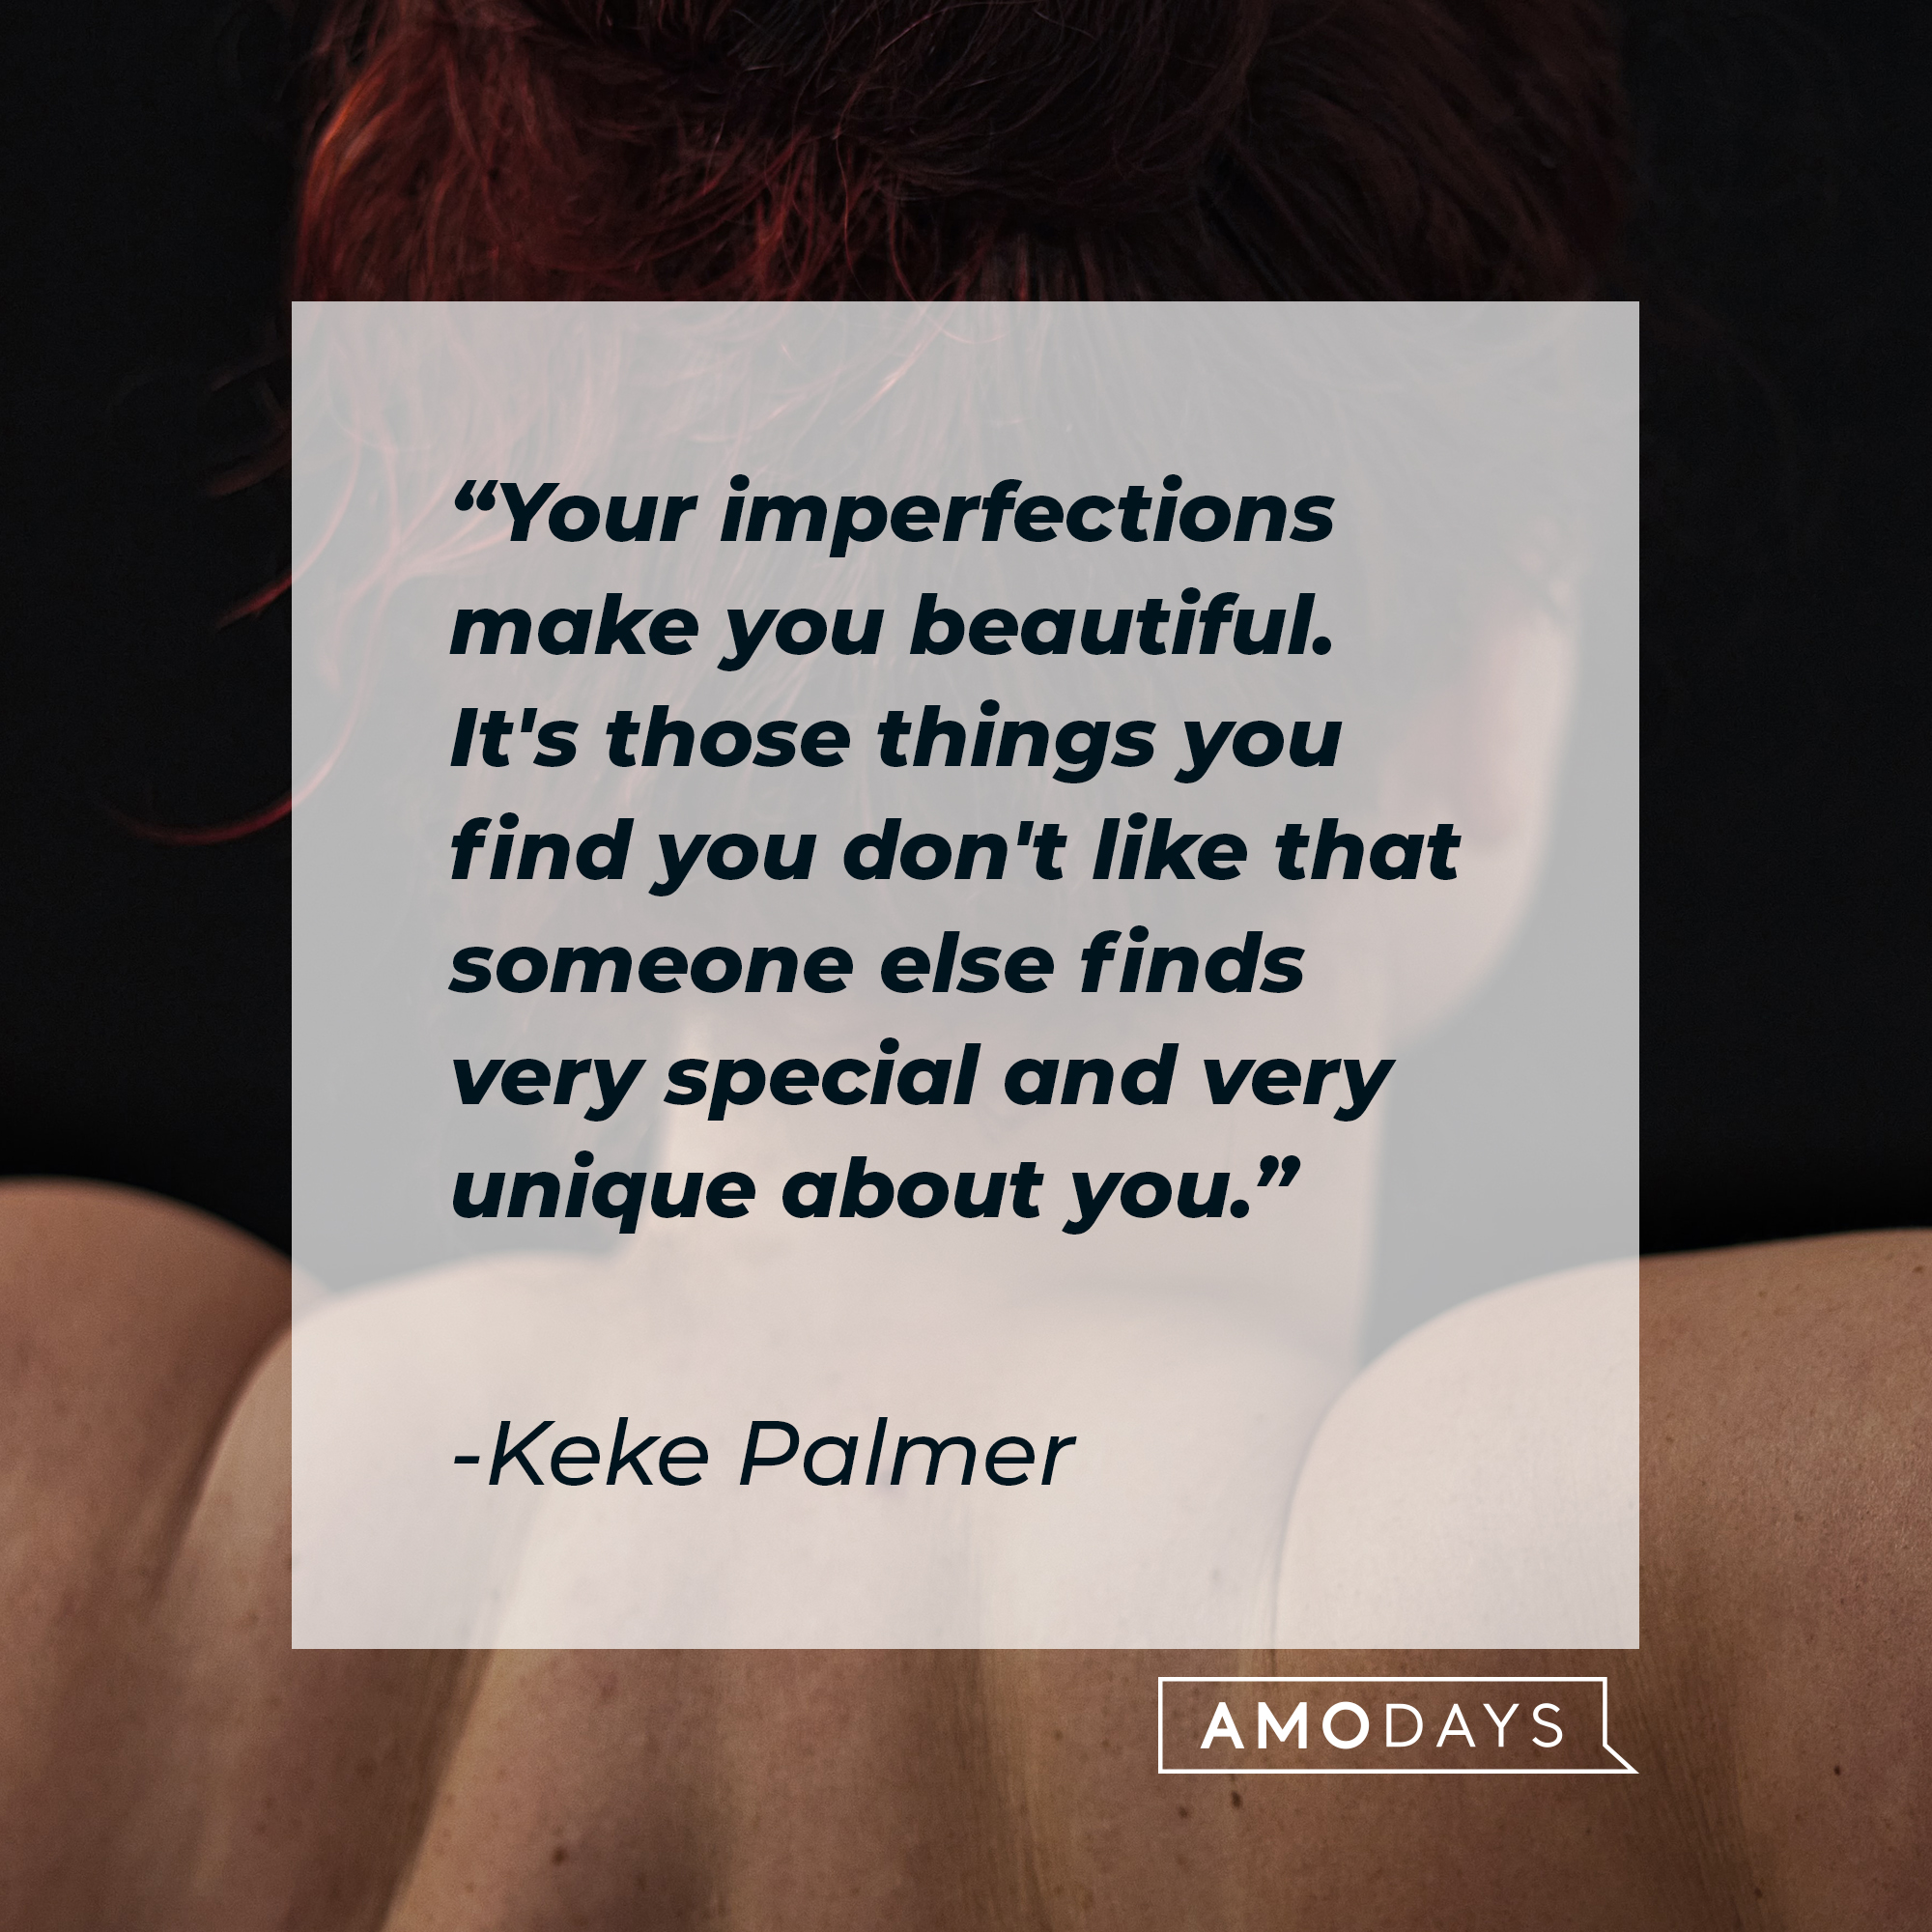 Keke Palmer's quote: "Your imperfections make you beautiful. It's those things you find you don't like that someone else finds very special and very unique about you." | Image: Unsplash